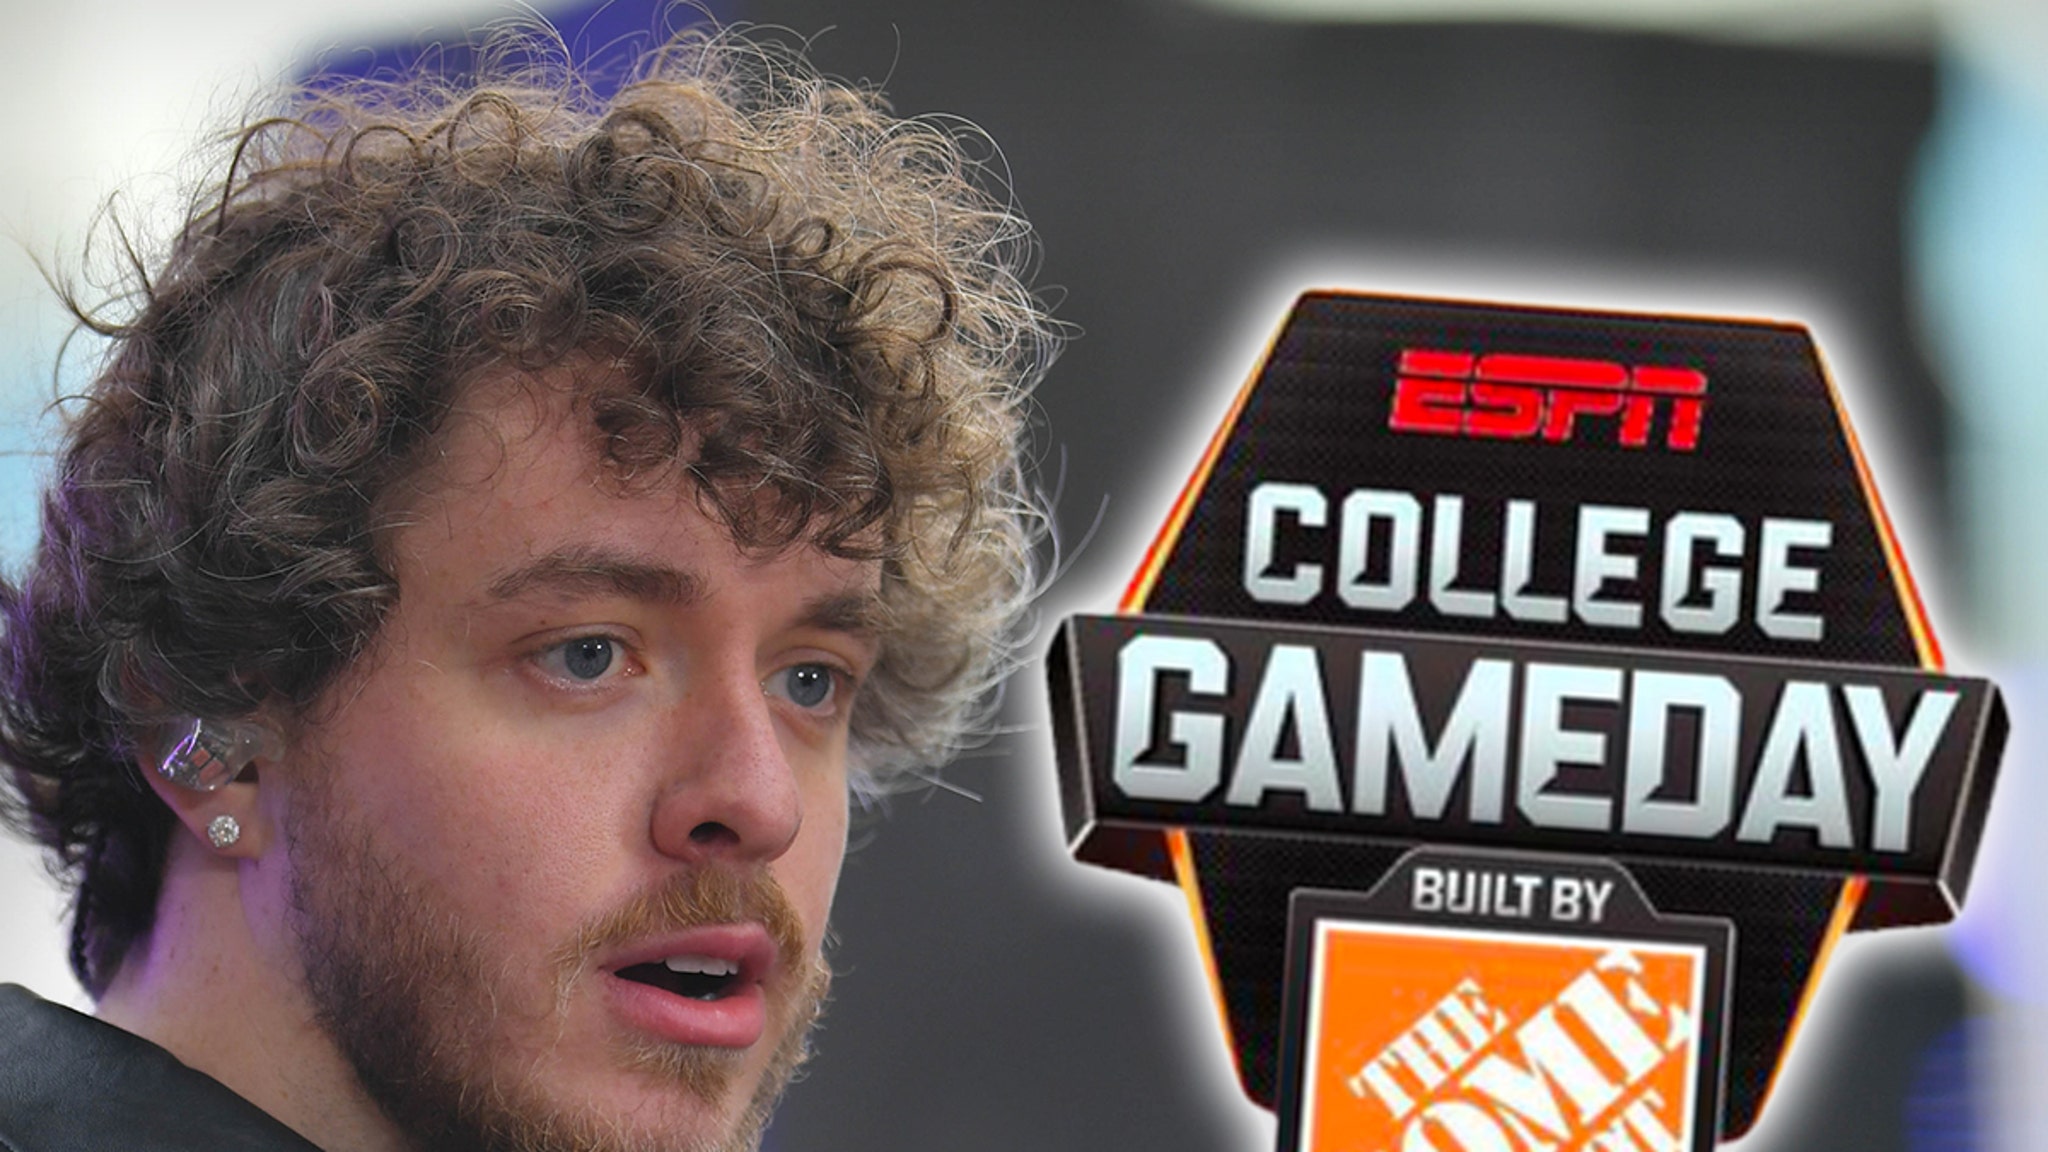 Jack Harlow’s ‘College GameDay’ Crowd was Dead, Analysis Goes Viral